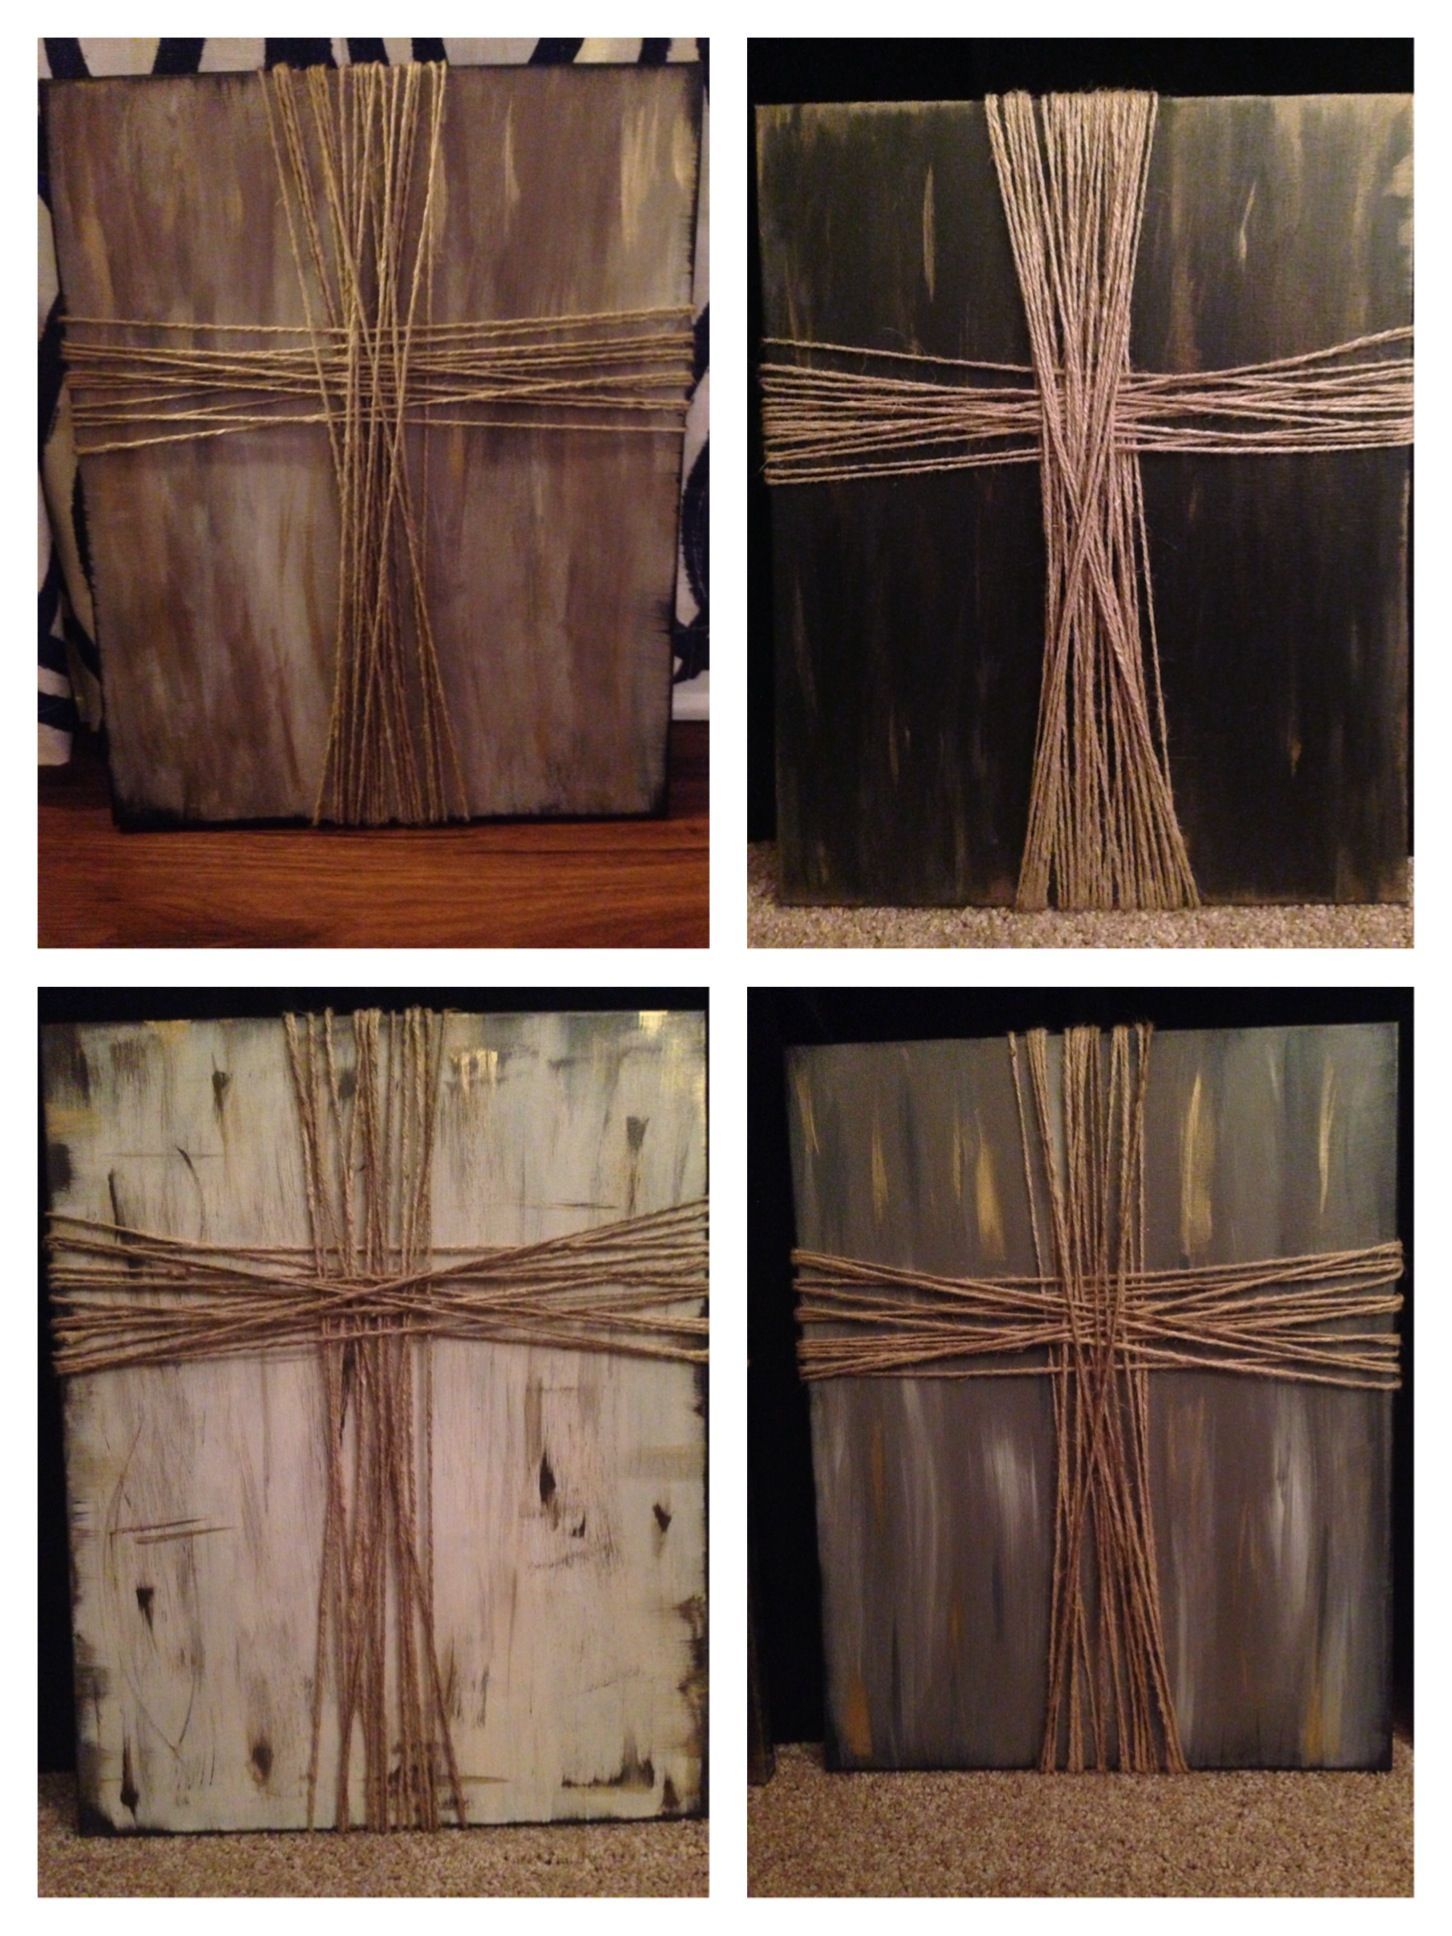 Made these crosses for Christmas presents this year. DIY cross on canvas: Paint background any color a